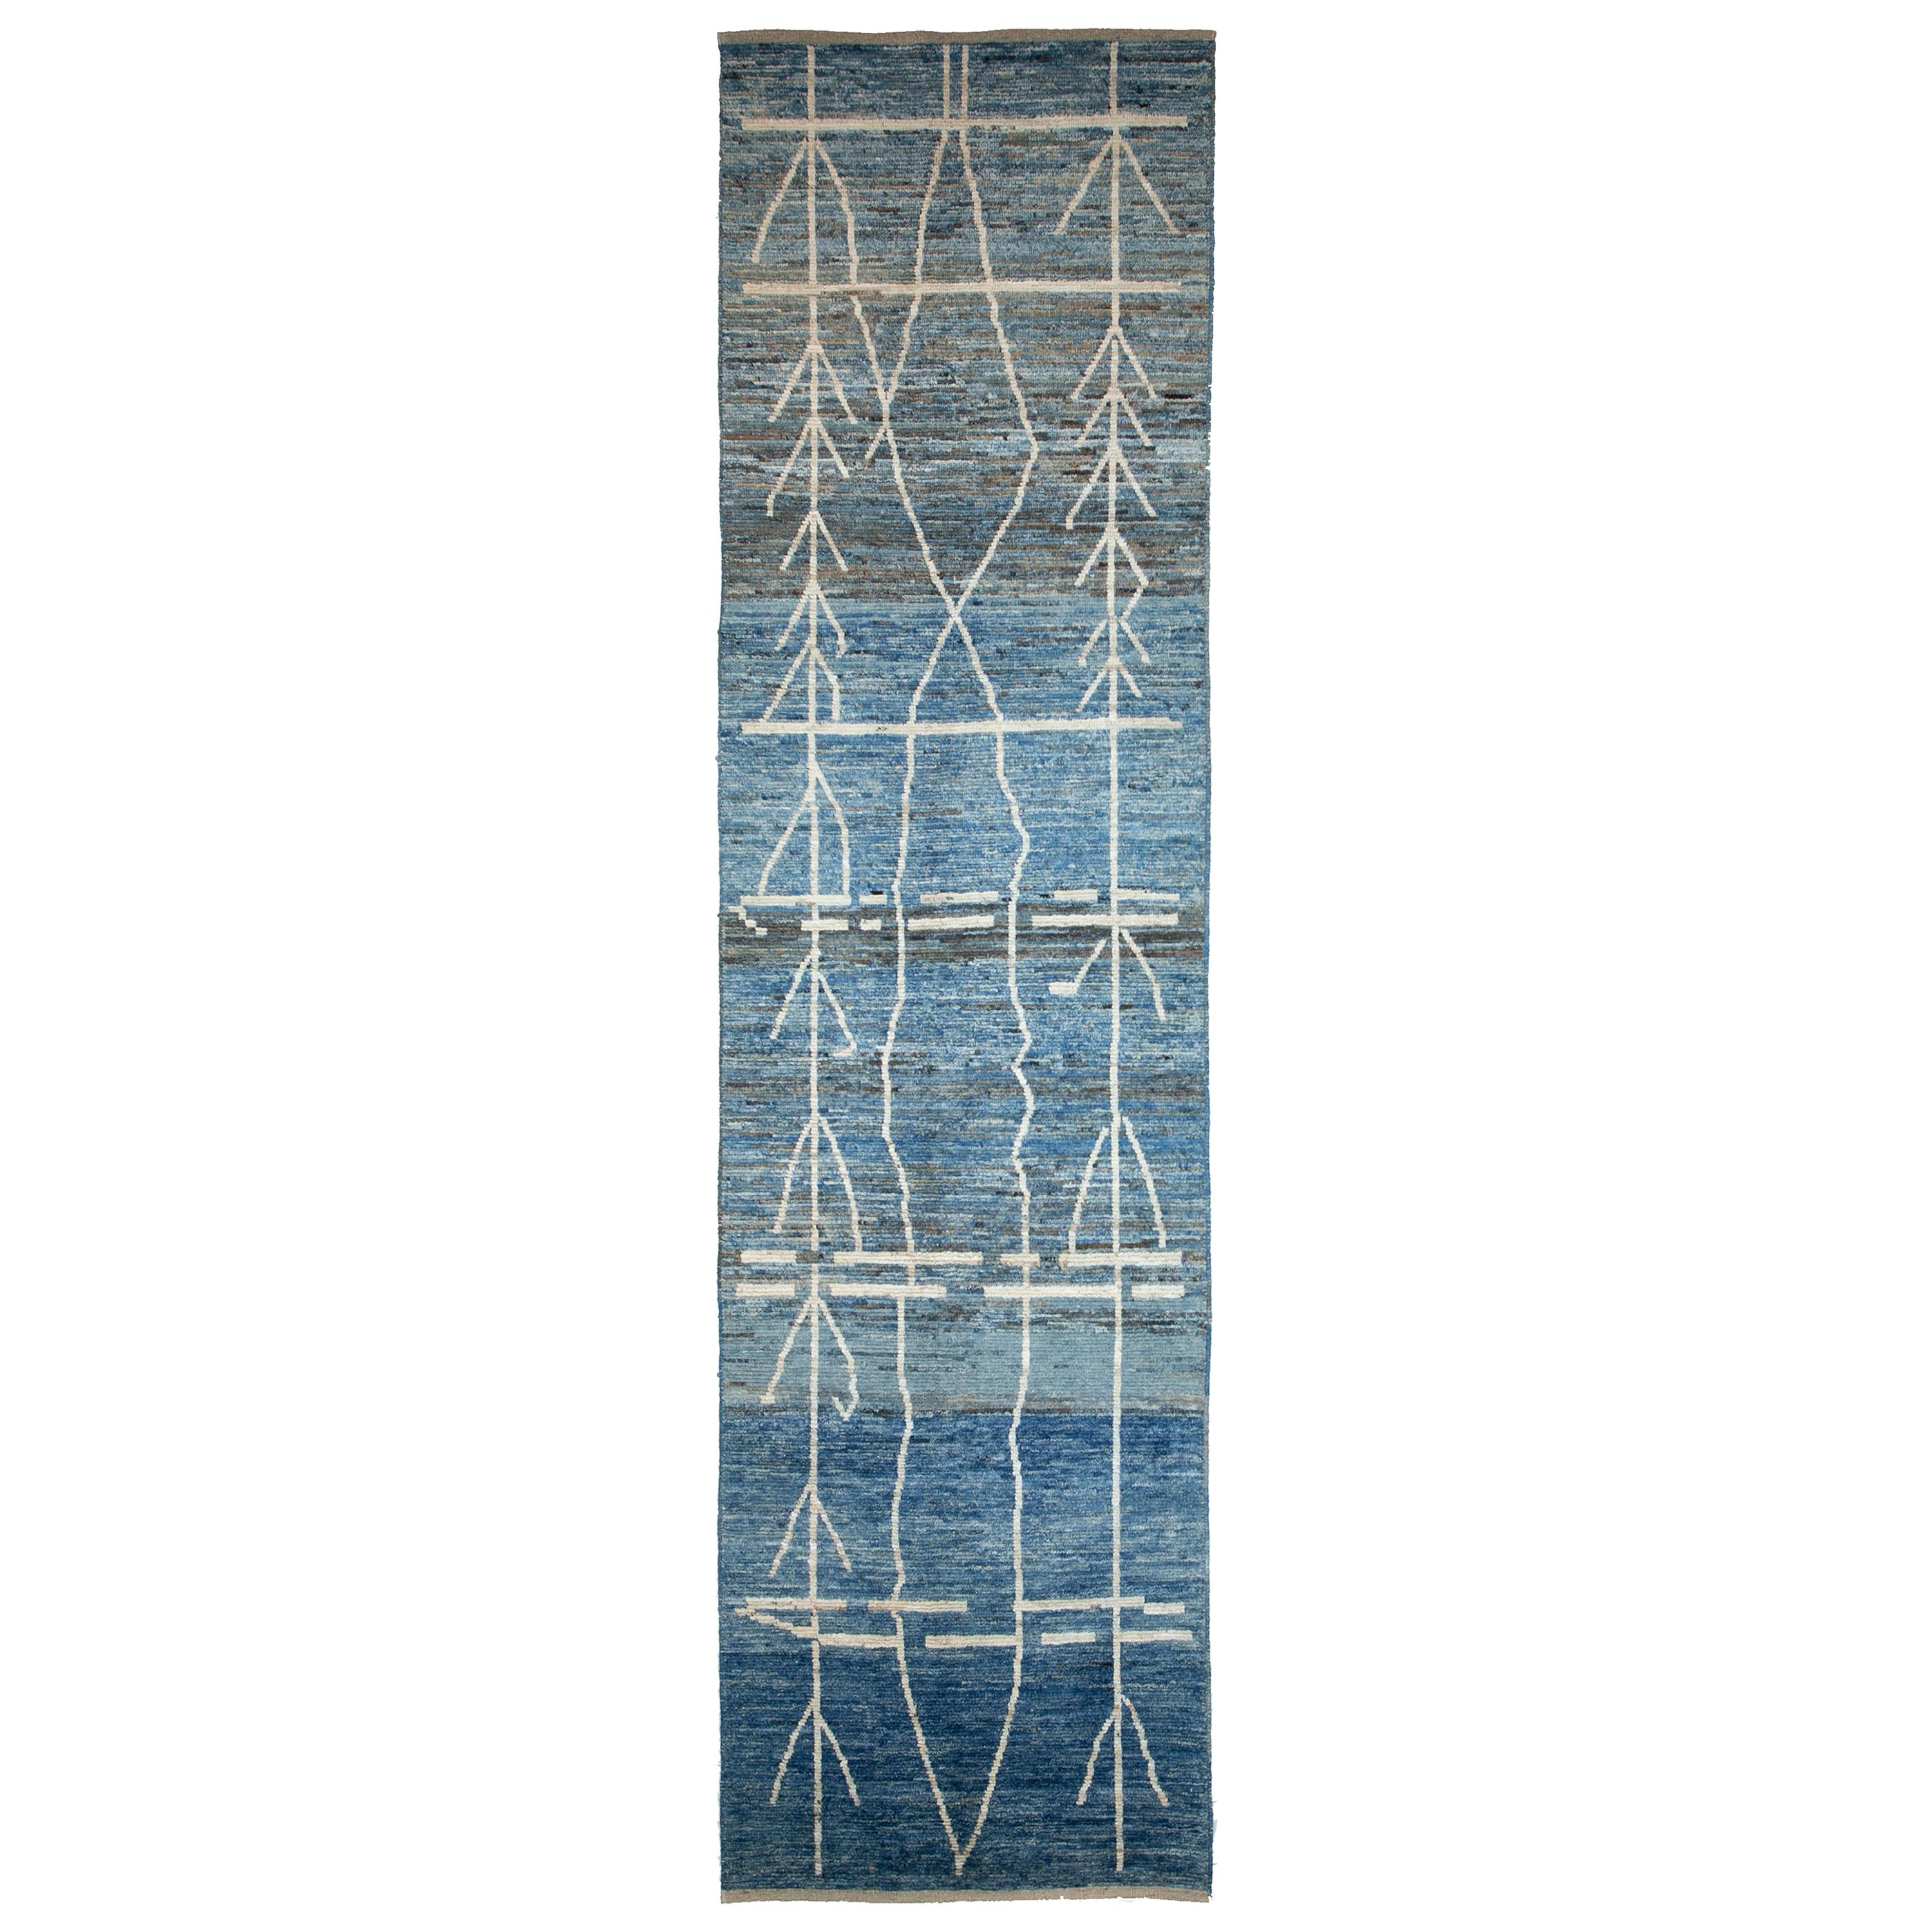 Nazmiyal Collection Berber Blue Modern Moroccan Style Runner Rug 4ft 2 in x 16ft